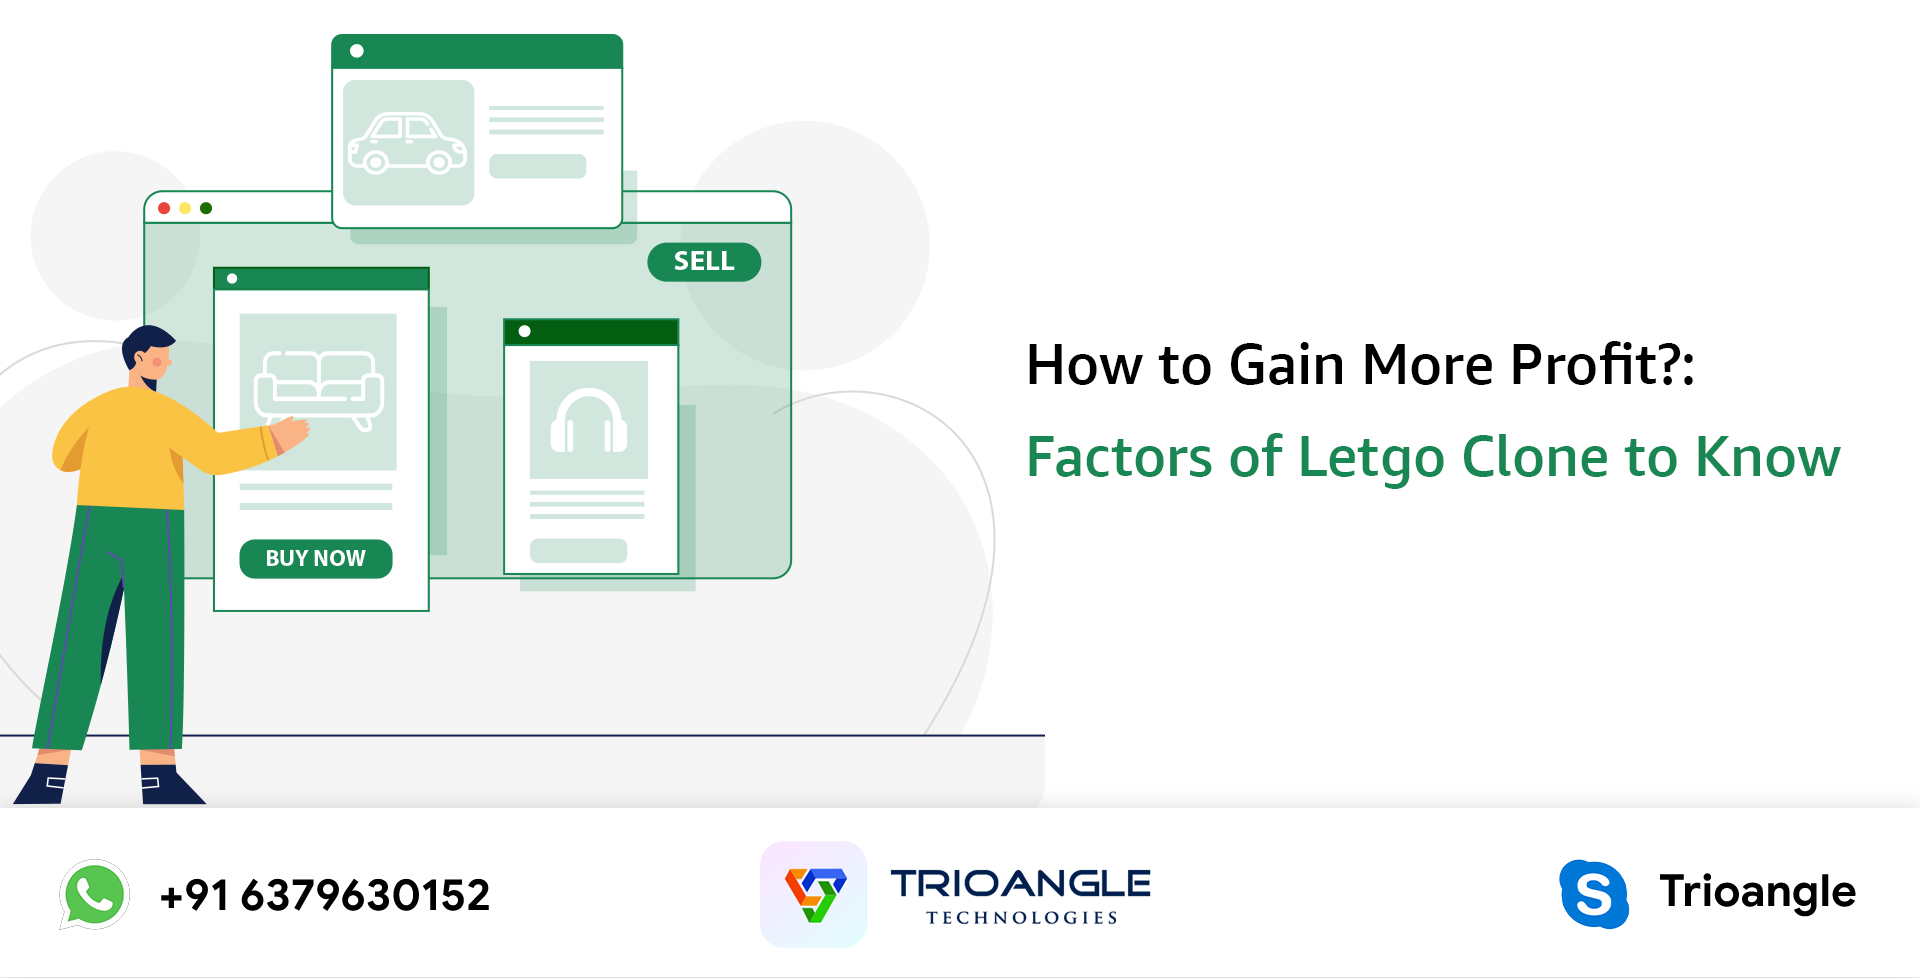 How to Gain More Profit?: Factors of Letgo Clone to Know